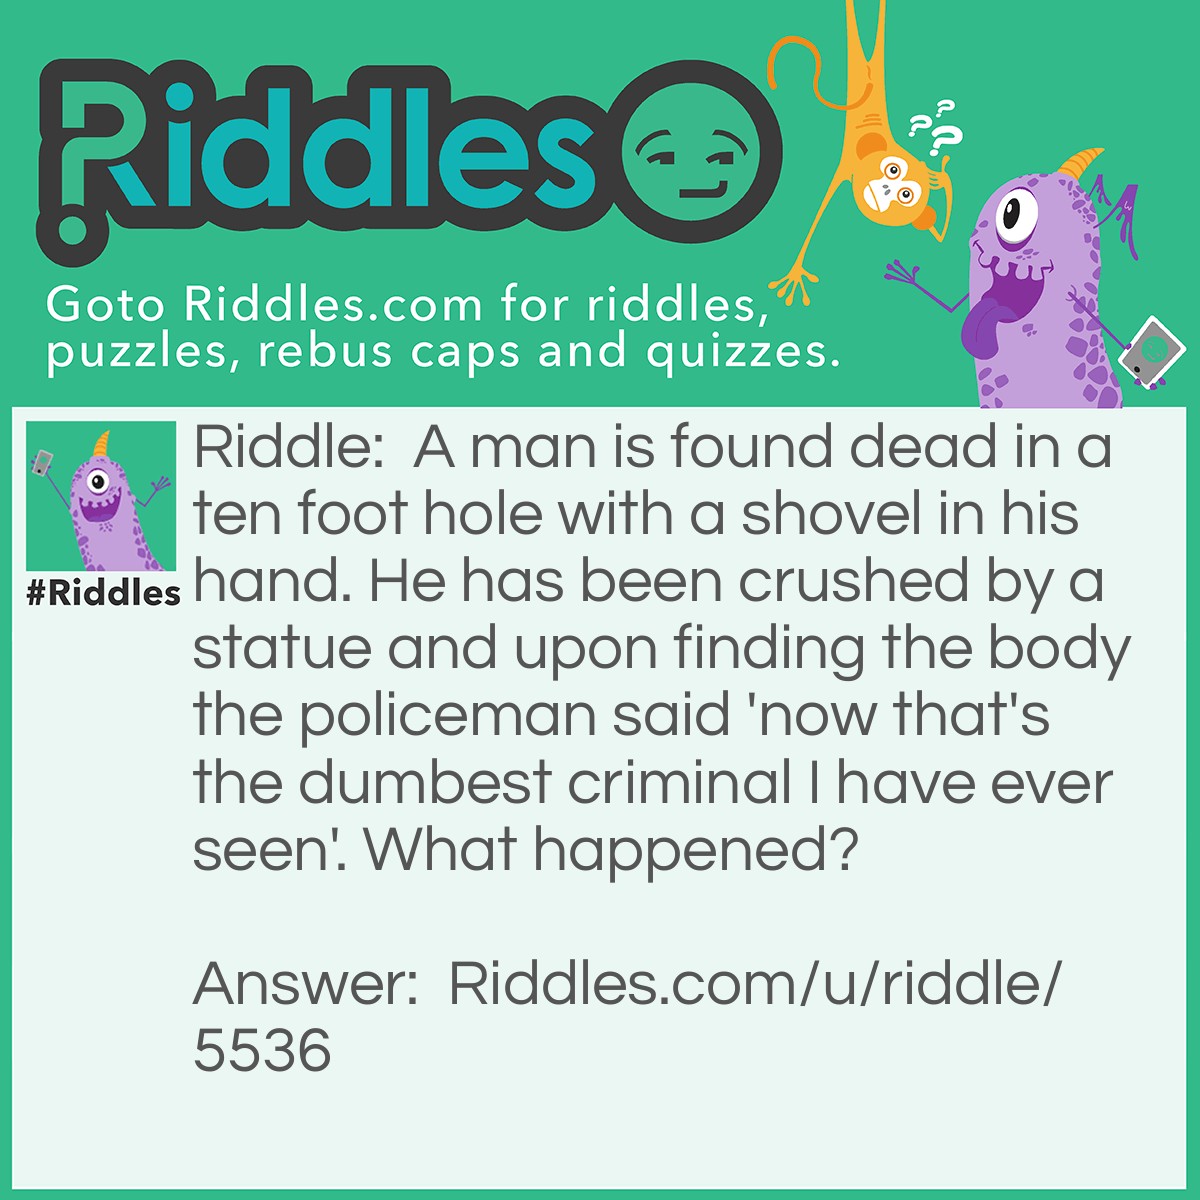 Riddle: A man is found dead in a ten foot hole with a shovel in his hand. He has been crushed by a statue and upon finding the body the policeman said 'now that's the dumbest criminal I have ever seen'. What happened? Answer: The man was a grave robber. He dug on the wrong side of the statue (gravestone) and upon realizing this he began to dig over to the right side. Whilst digging under the statue it fell through the dirt and dropped onto his head, crushing him.